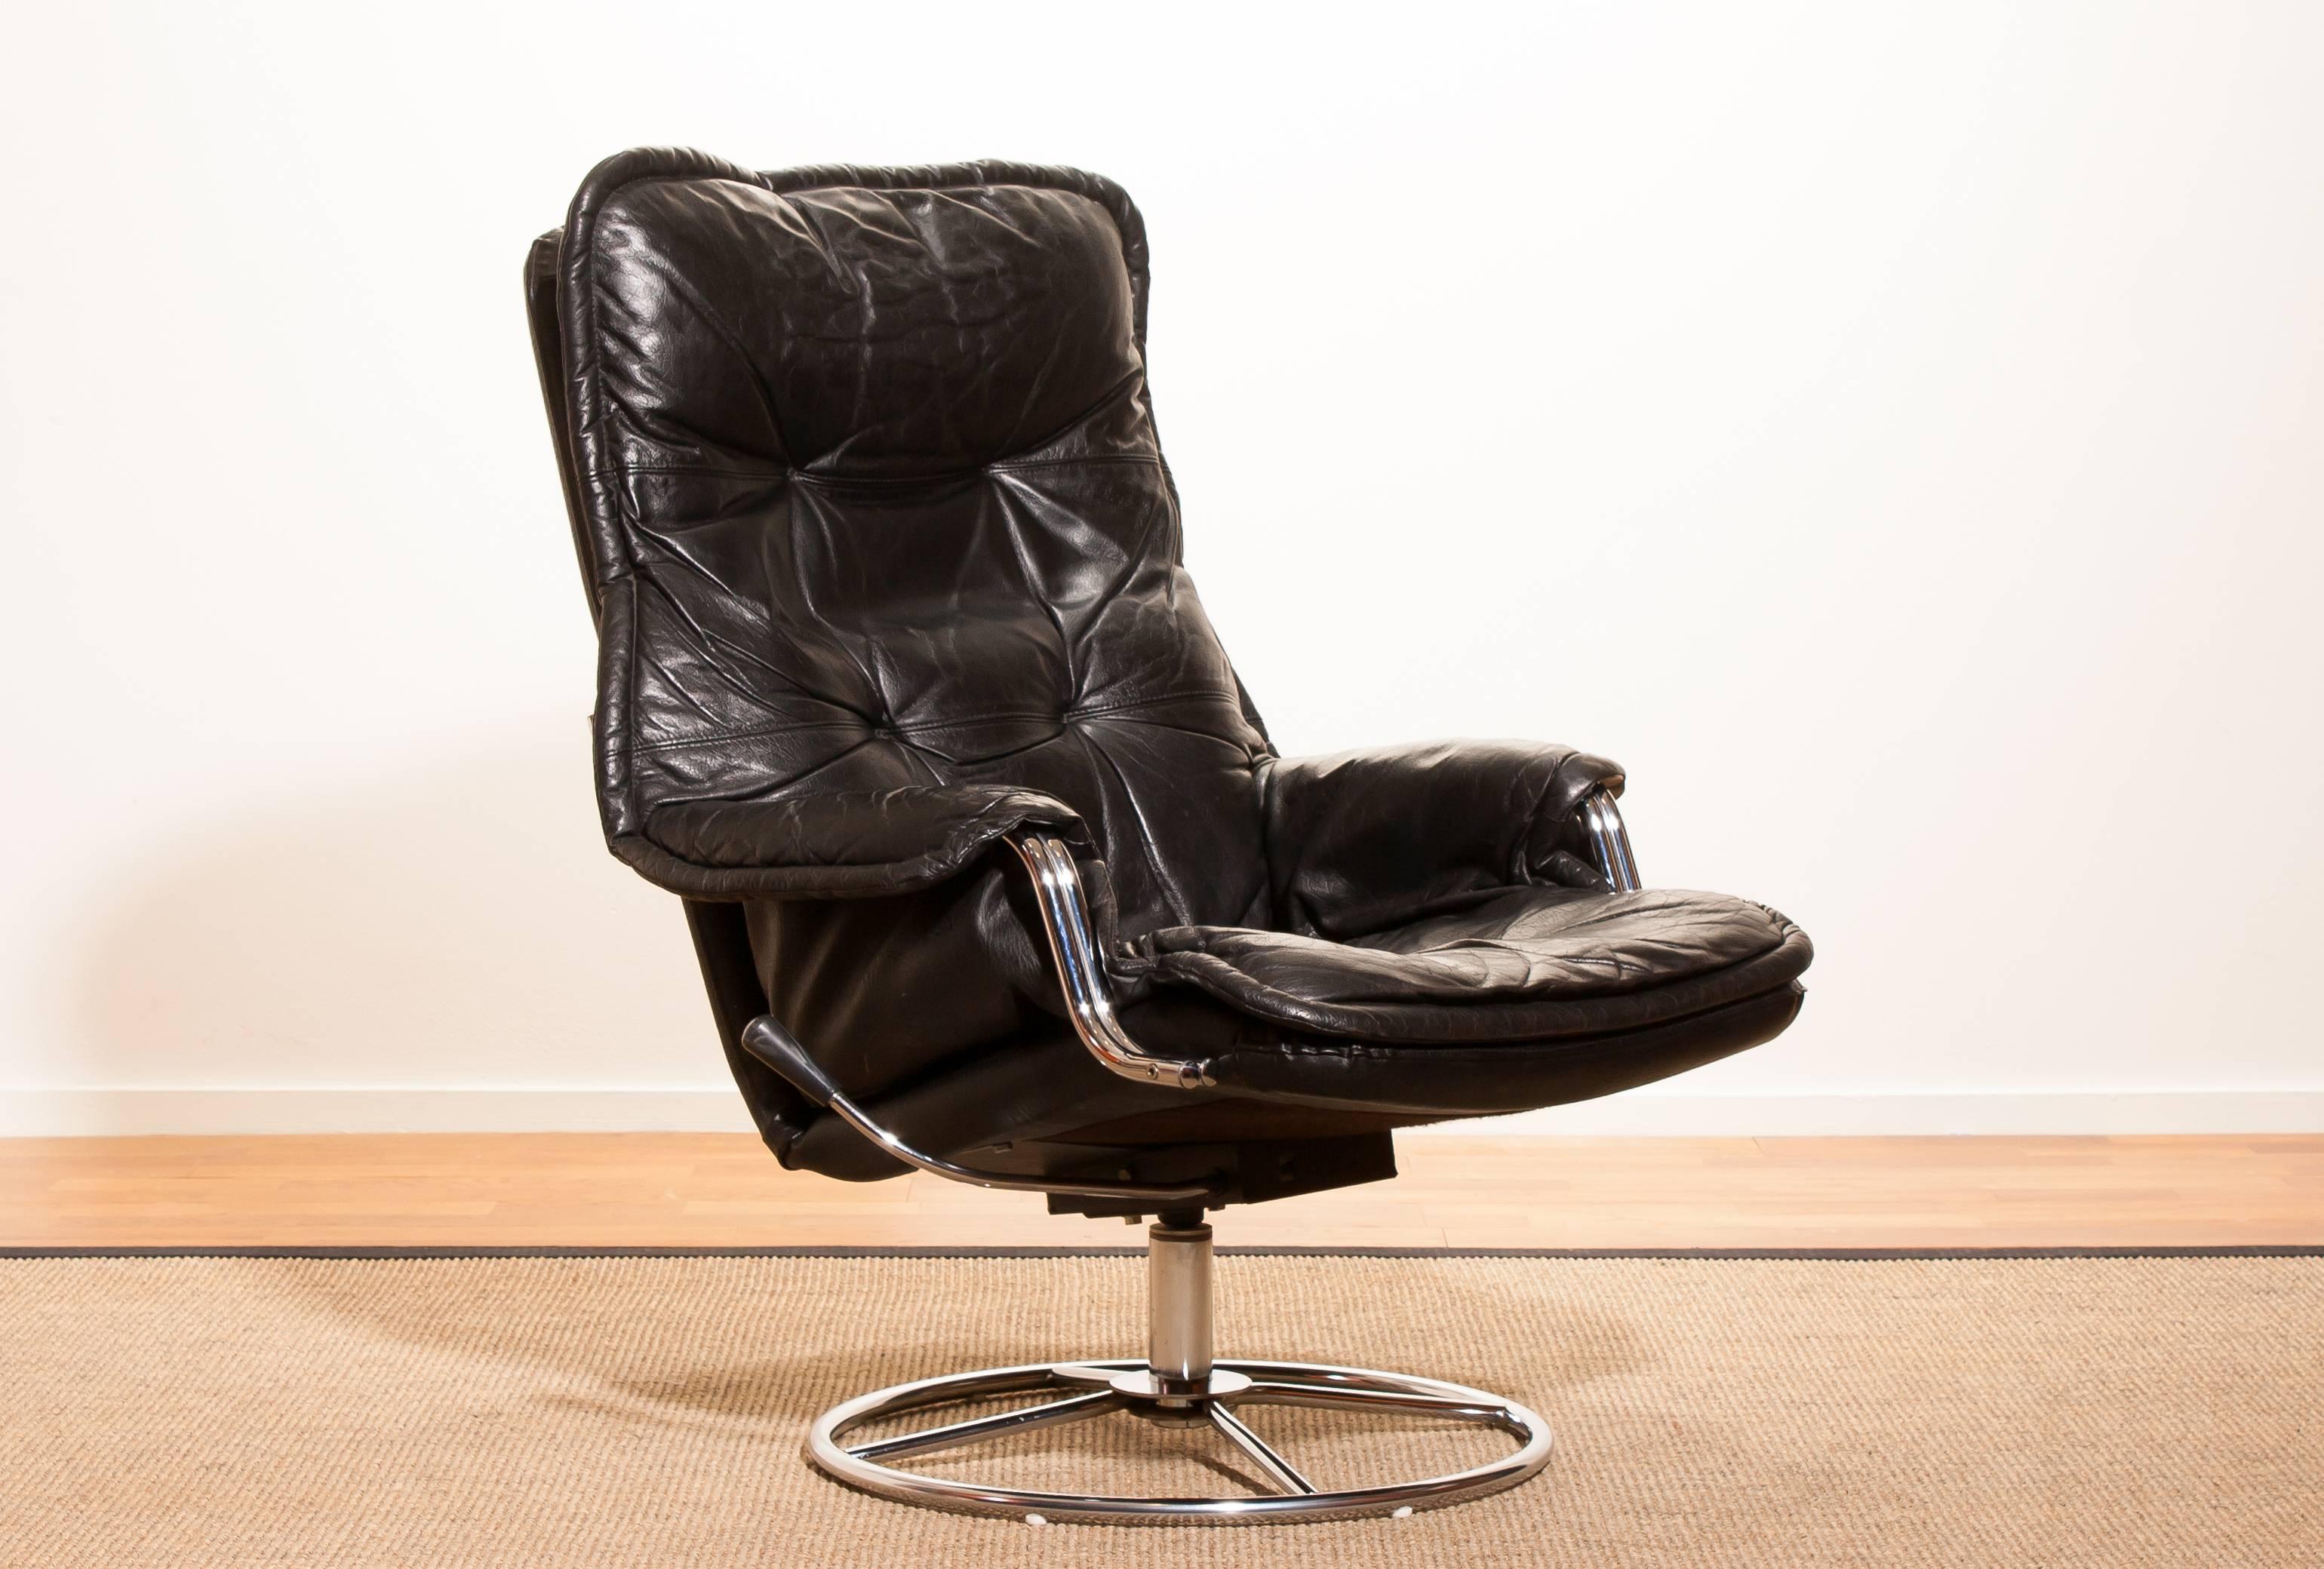 Beautiful lounge chair made in Sweden.
This very nice design chair has a black leather seating and armrests on a swivel chrome steel frame.
It is in a wonderful condition.
Period 1970s
Dimensions: H 94 cm x W 68 cm x D 72 cm x SH 40.